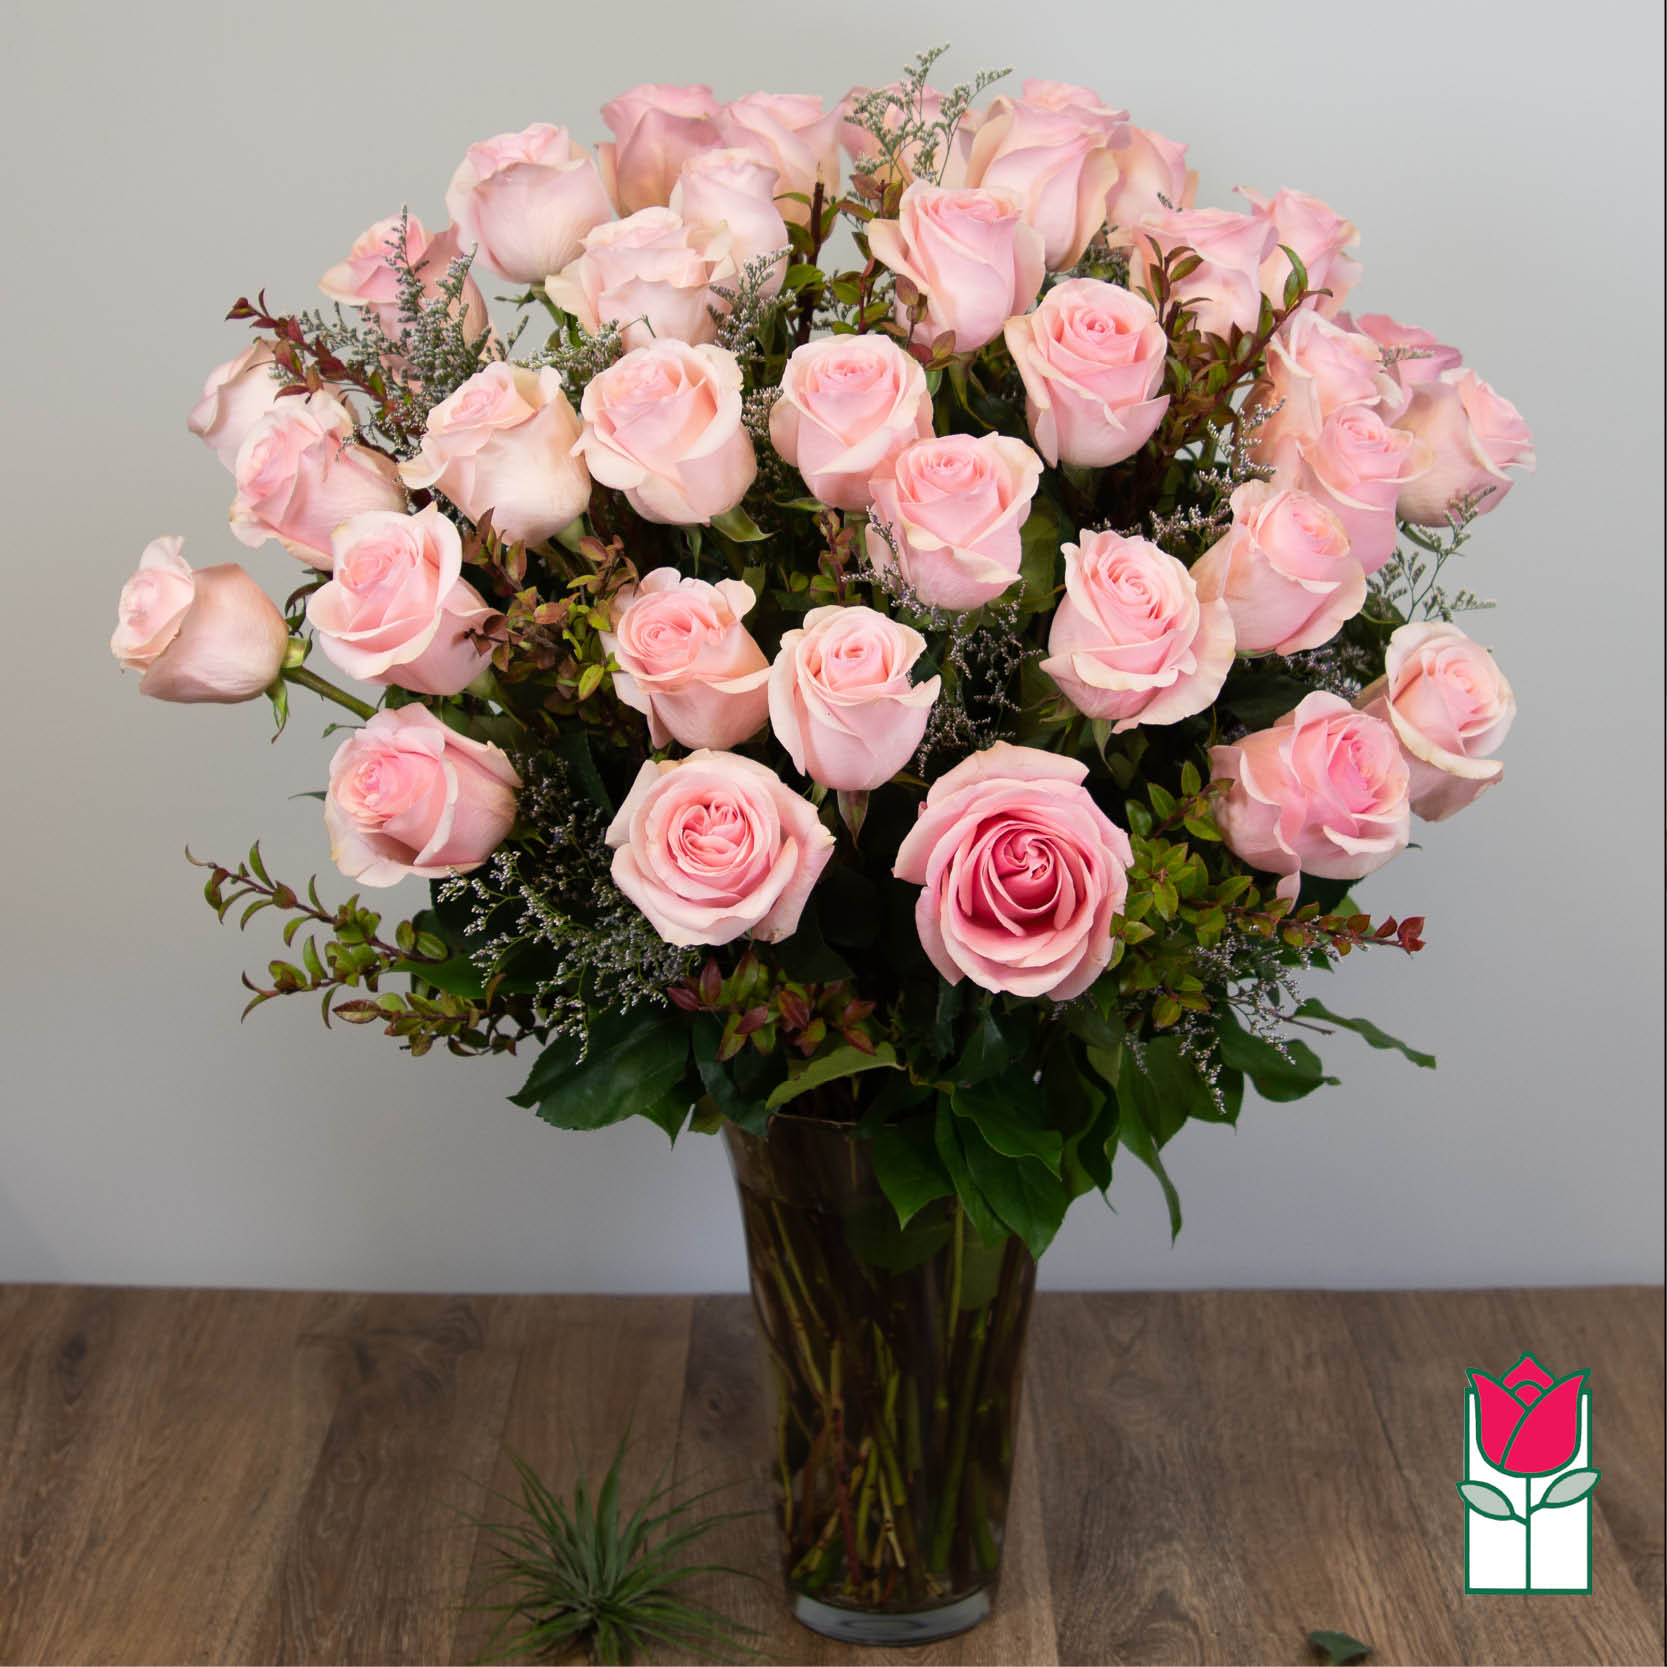 Beretania's 3 Doz. Extra Long Stem Pink Rose Bouquet (Pink Hue May Vary) - 3 Dozen Premium Extra Long Stem Pink Roses  Indulge in the timeless elegance of the Beretania Florist Premium Extra Long Stem Roses bouquet. Our exquisite bouquet features premium Ecuadorian extra-fancy roses, which are 30% larger than any other rose in the islands. Available in a classic glass vase with assorted foliage and filler flowers, this bouquet is the perfect gift for any occasion.  But our exceptional product is only half the story. At Beretania Florist, we pride ourselves on our professional and convenient delivery service. We carefully hand-deliver each bouquet to ensure it arrives at its destination in pristine condition. Our team is dedicated to providing the highest level of customer service, and we strive to exceed your expectations with every order.  And for added convenience, we offer the option to choose or upgrade the number of roses in your bouquet. Whether you prefer a classic one dozen, a stunning one and a half dozen, a grand two dozen, or an opulent three dozen, we have the perfect bouquet for you.  Trust Beretania Florist to deliver the highest quality roses and the best service in the Honolulu area.